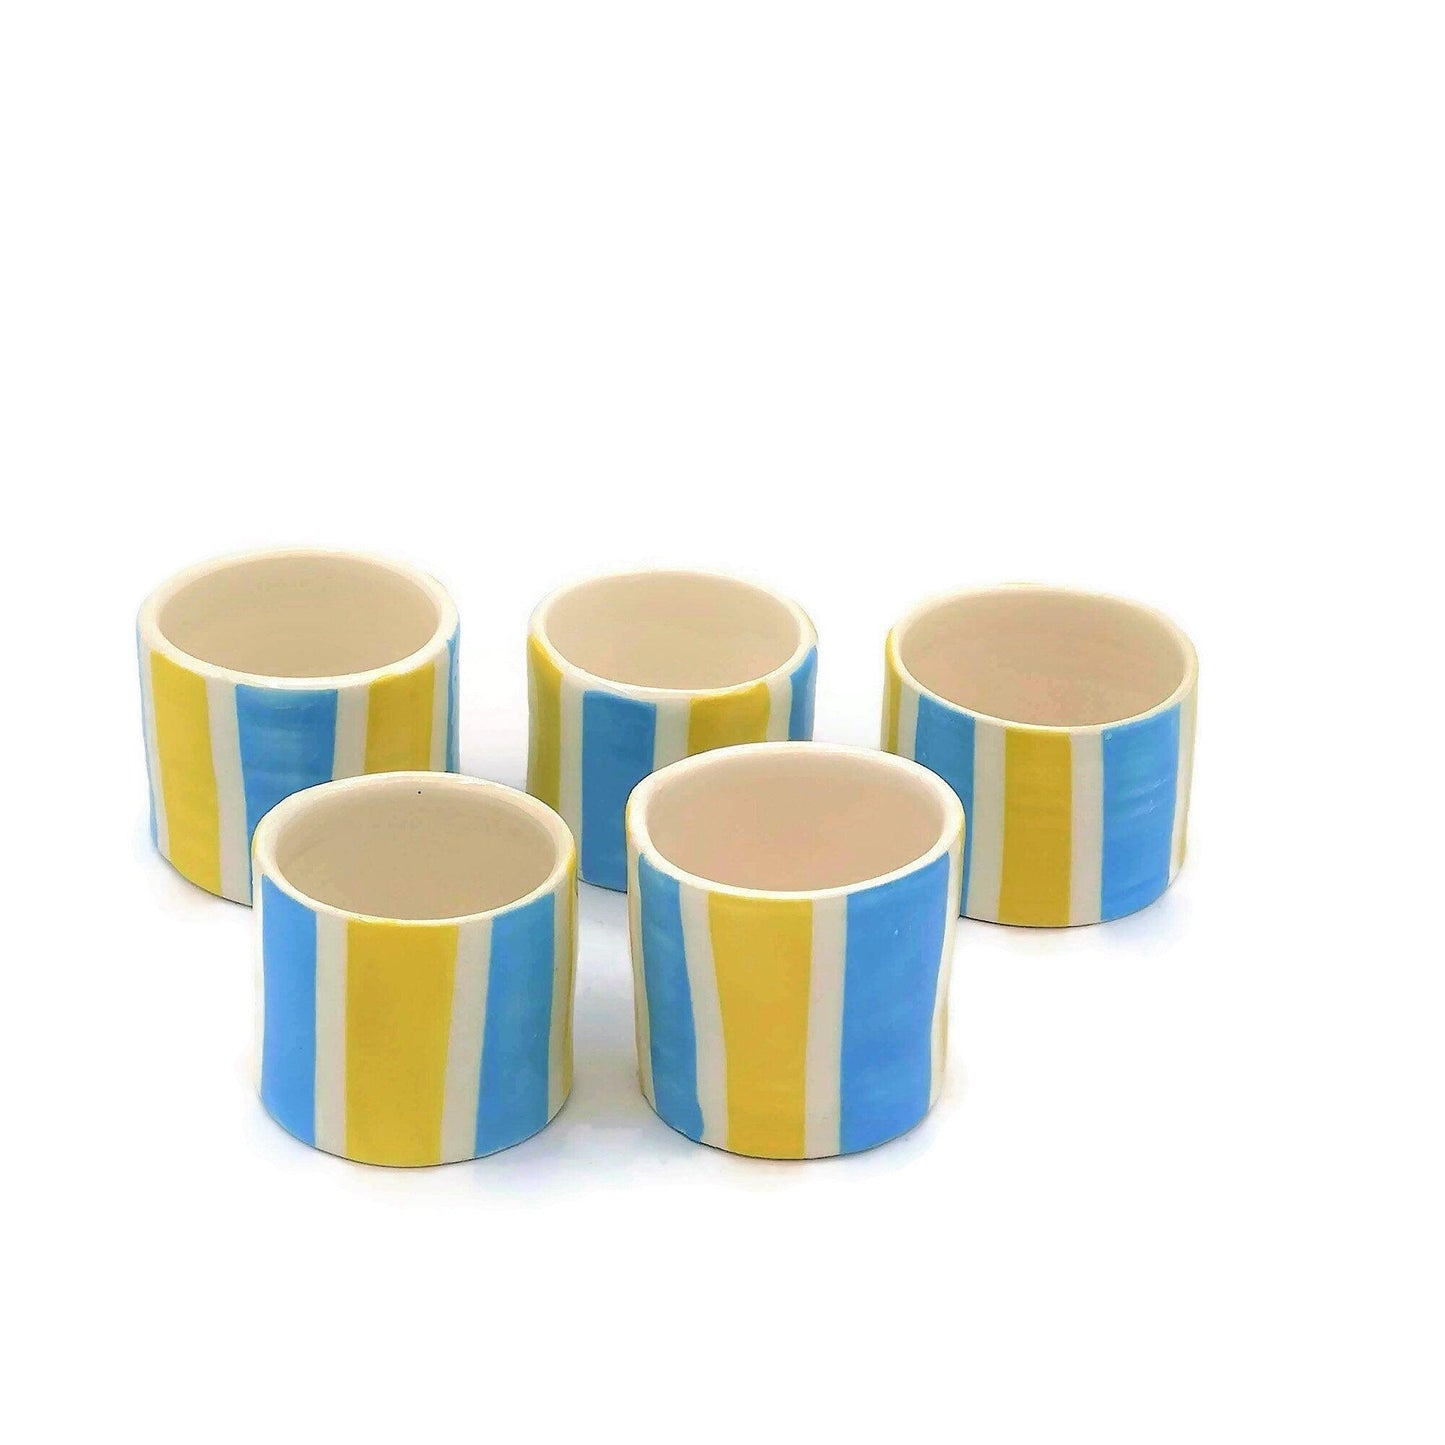 1Pc Handmade Ceramic Espresso Cup, Best Coffee Lovers Gifts For Him, Small Pottery Mug, Striped Blue And Yellow Shot Glass For Men - Ceramica Ana Rafael